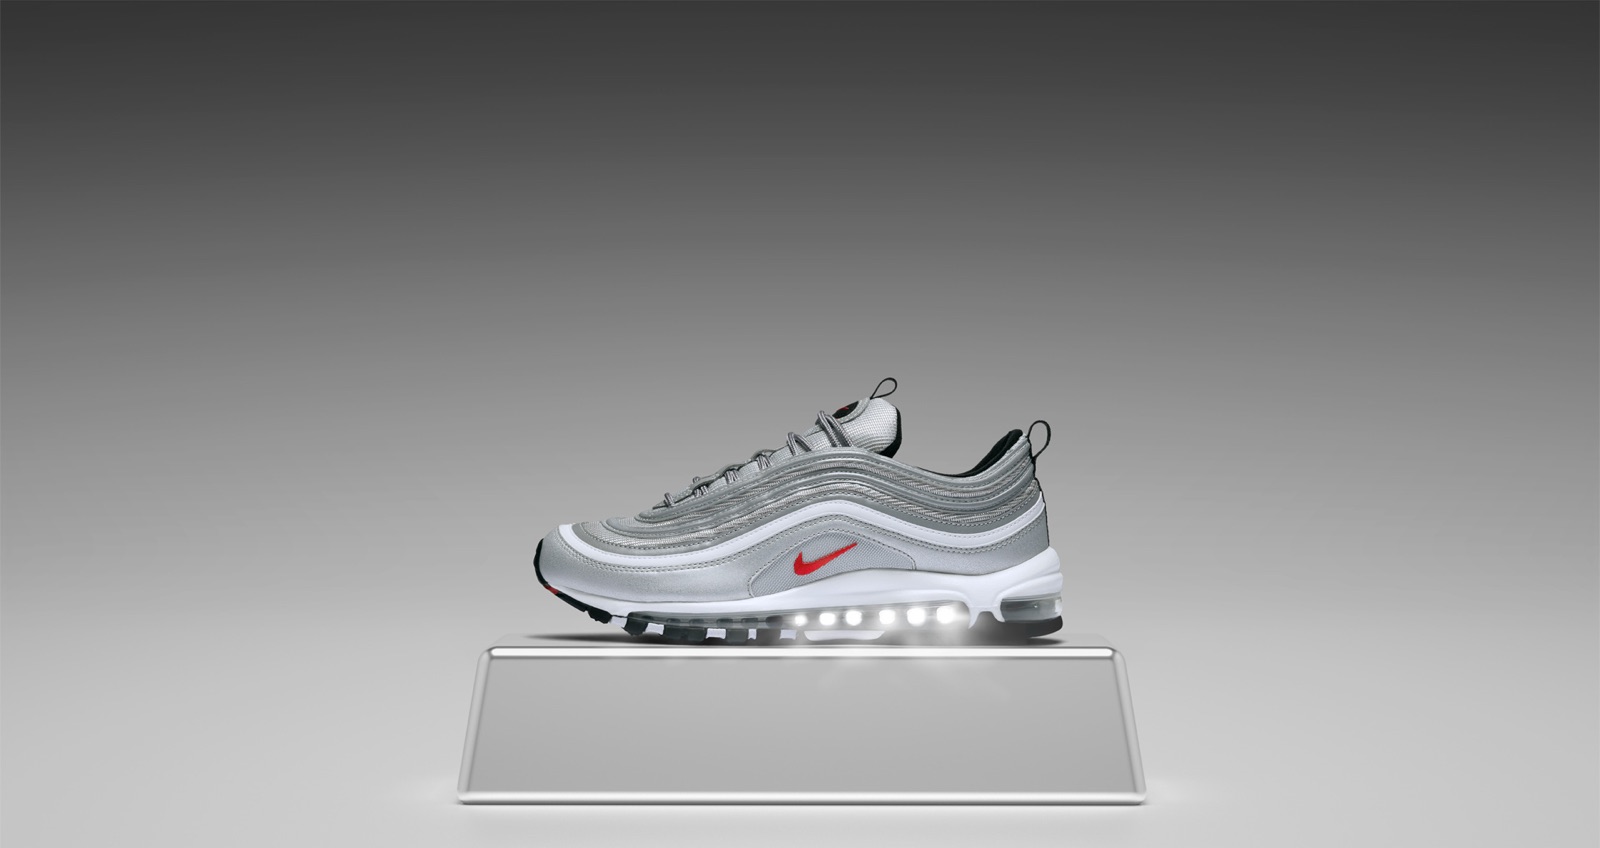 The Nike Air Max Silver Bullet Pack 97 95 Zero Plus Is Available Now Weartesters